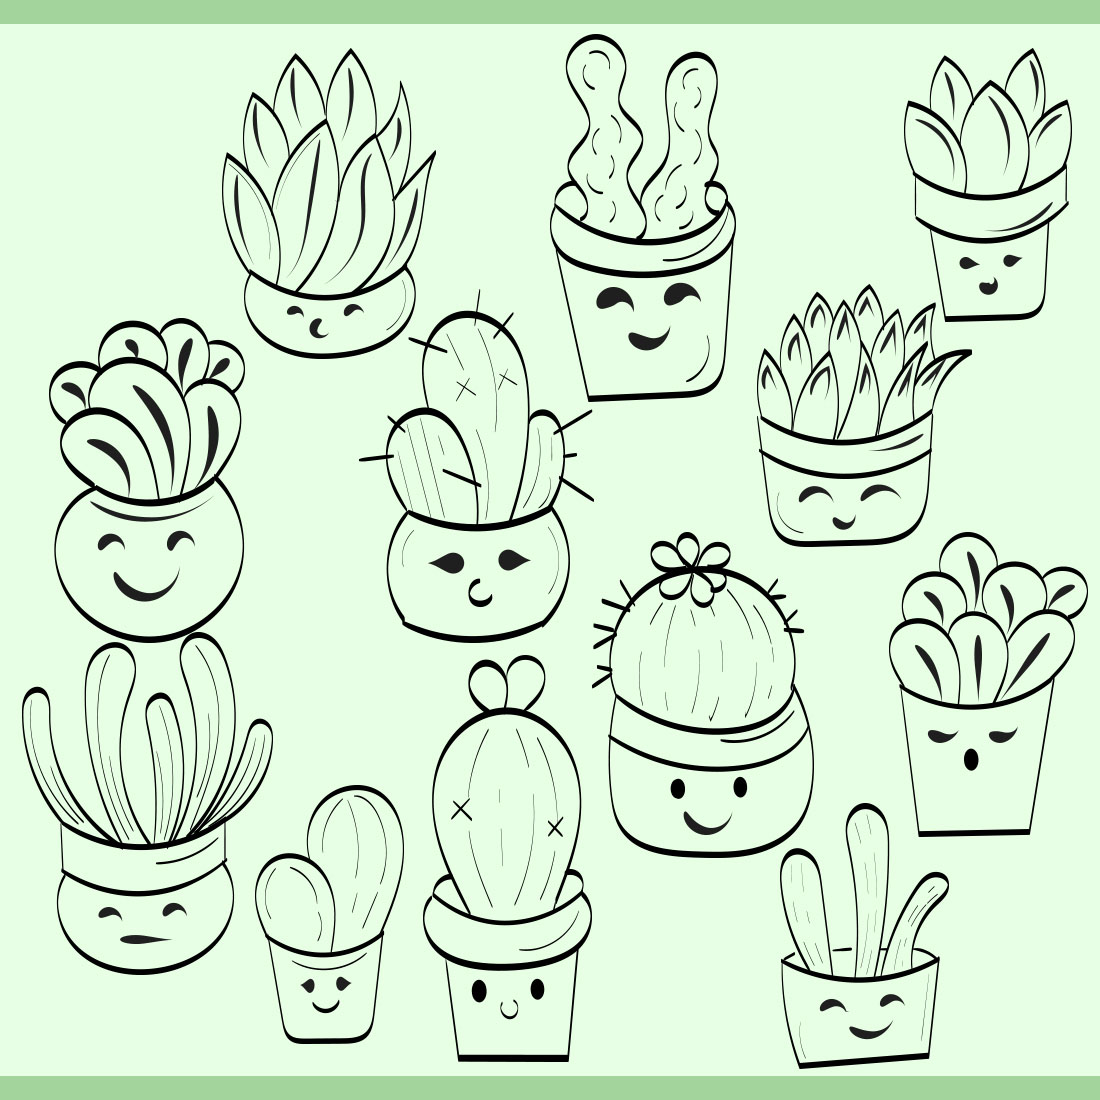 12 Cute Hand Drawn Cactus - Only $10 preview image.